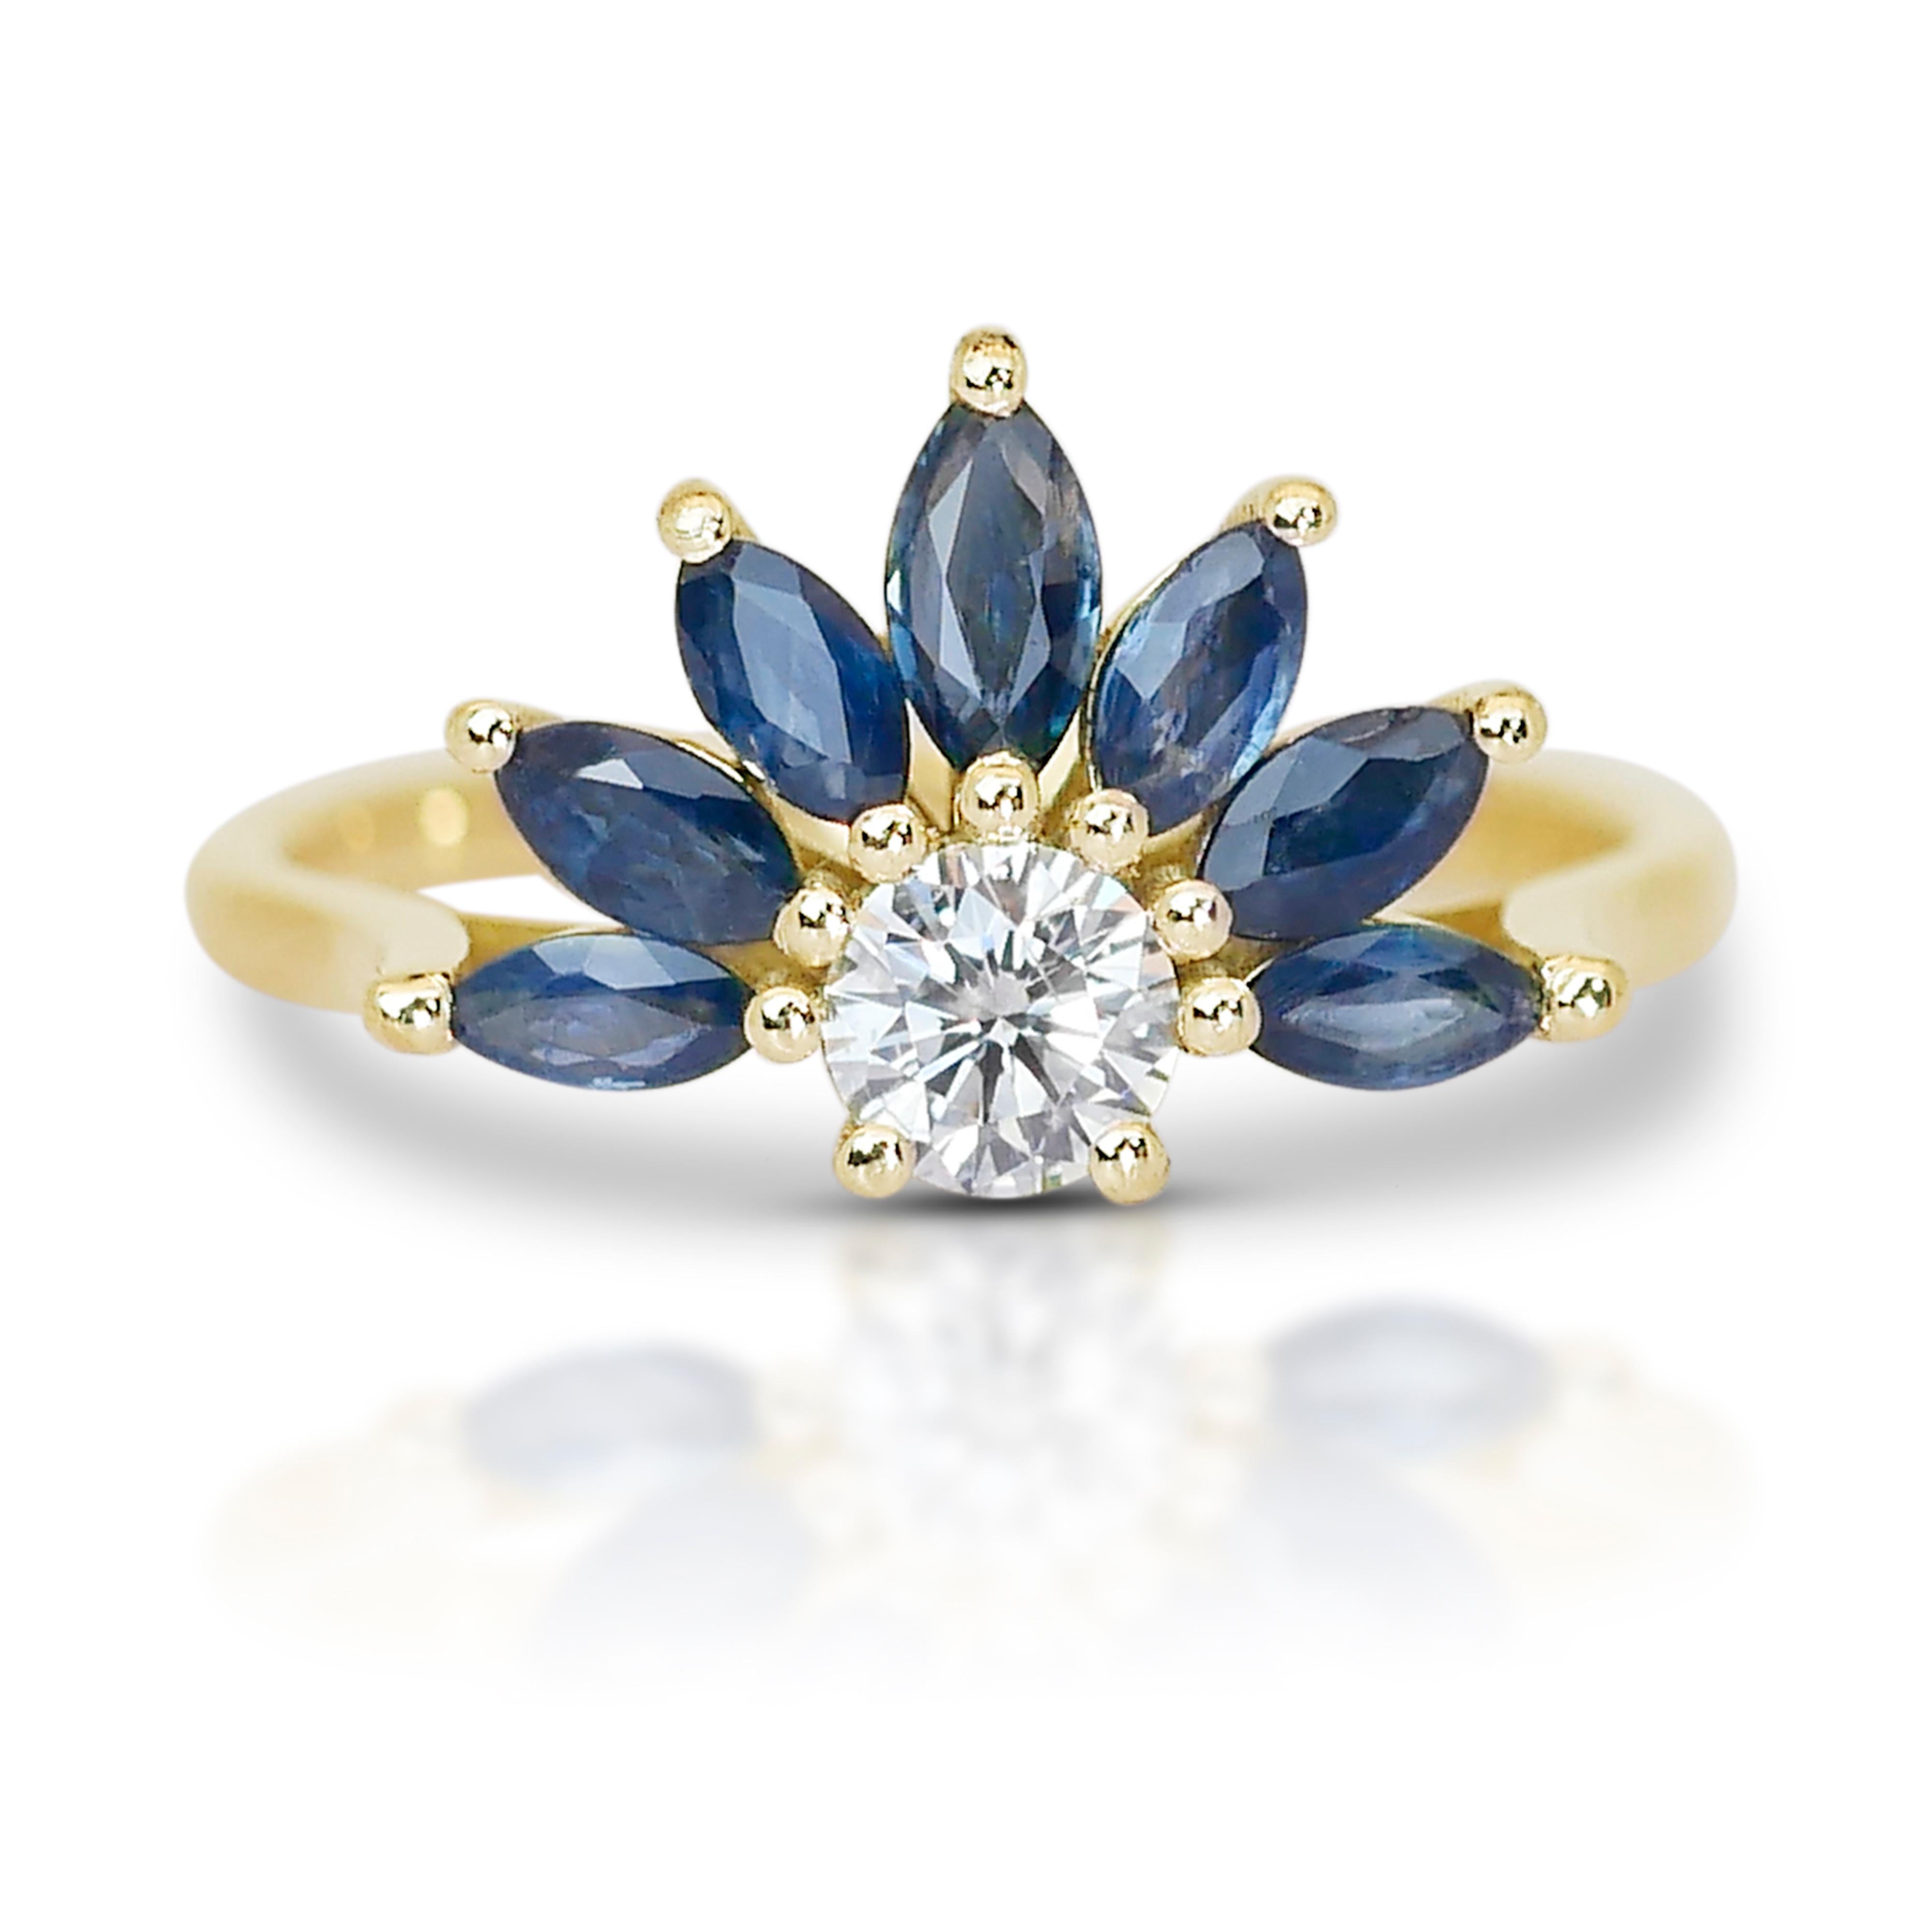 Enchanting 18K Yellow Gold Natural Diamond and Sapphire Ring w/1.40ct

Illuminate your style with our enchanting 18K yellow gold diamond and sapphire ring. At its center, a captivating round-cut diamond main stone weighing 0.40 carats, surrounding